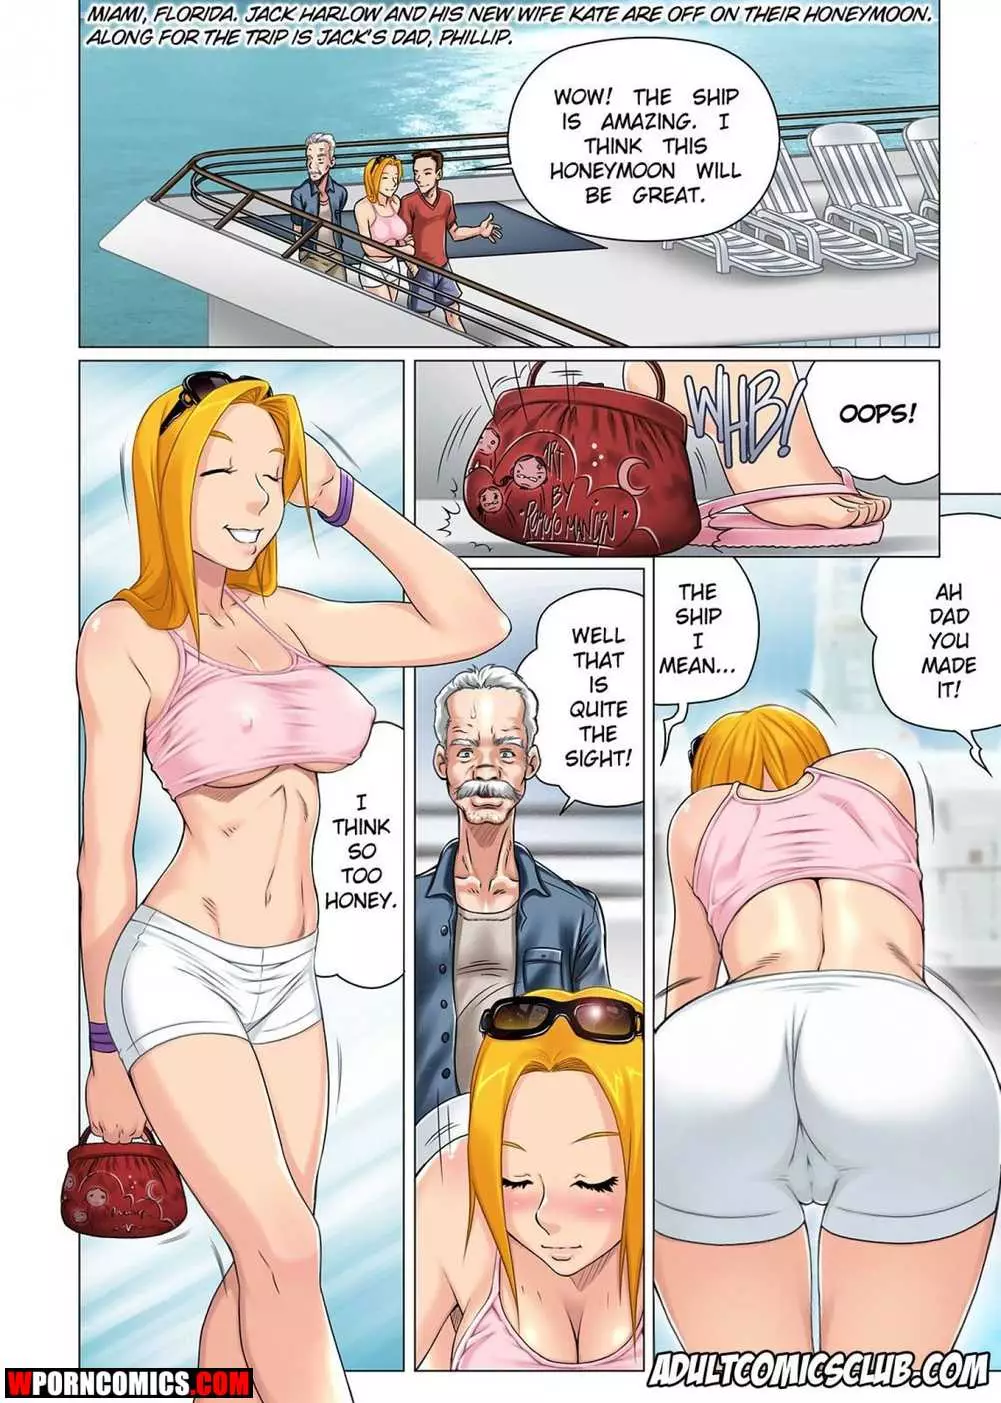 Tags Imagenes Comics Porno Manga Hentai Comic Horny Another Father Suegro Law 2